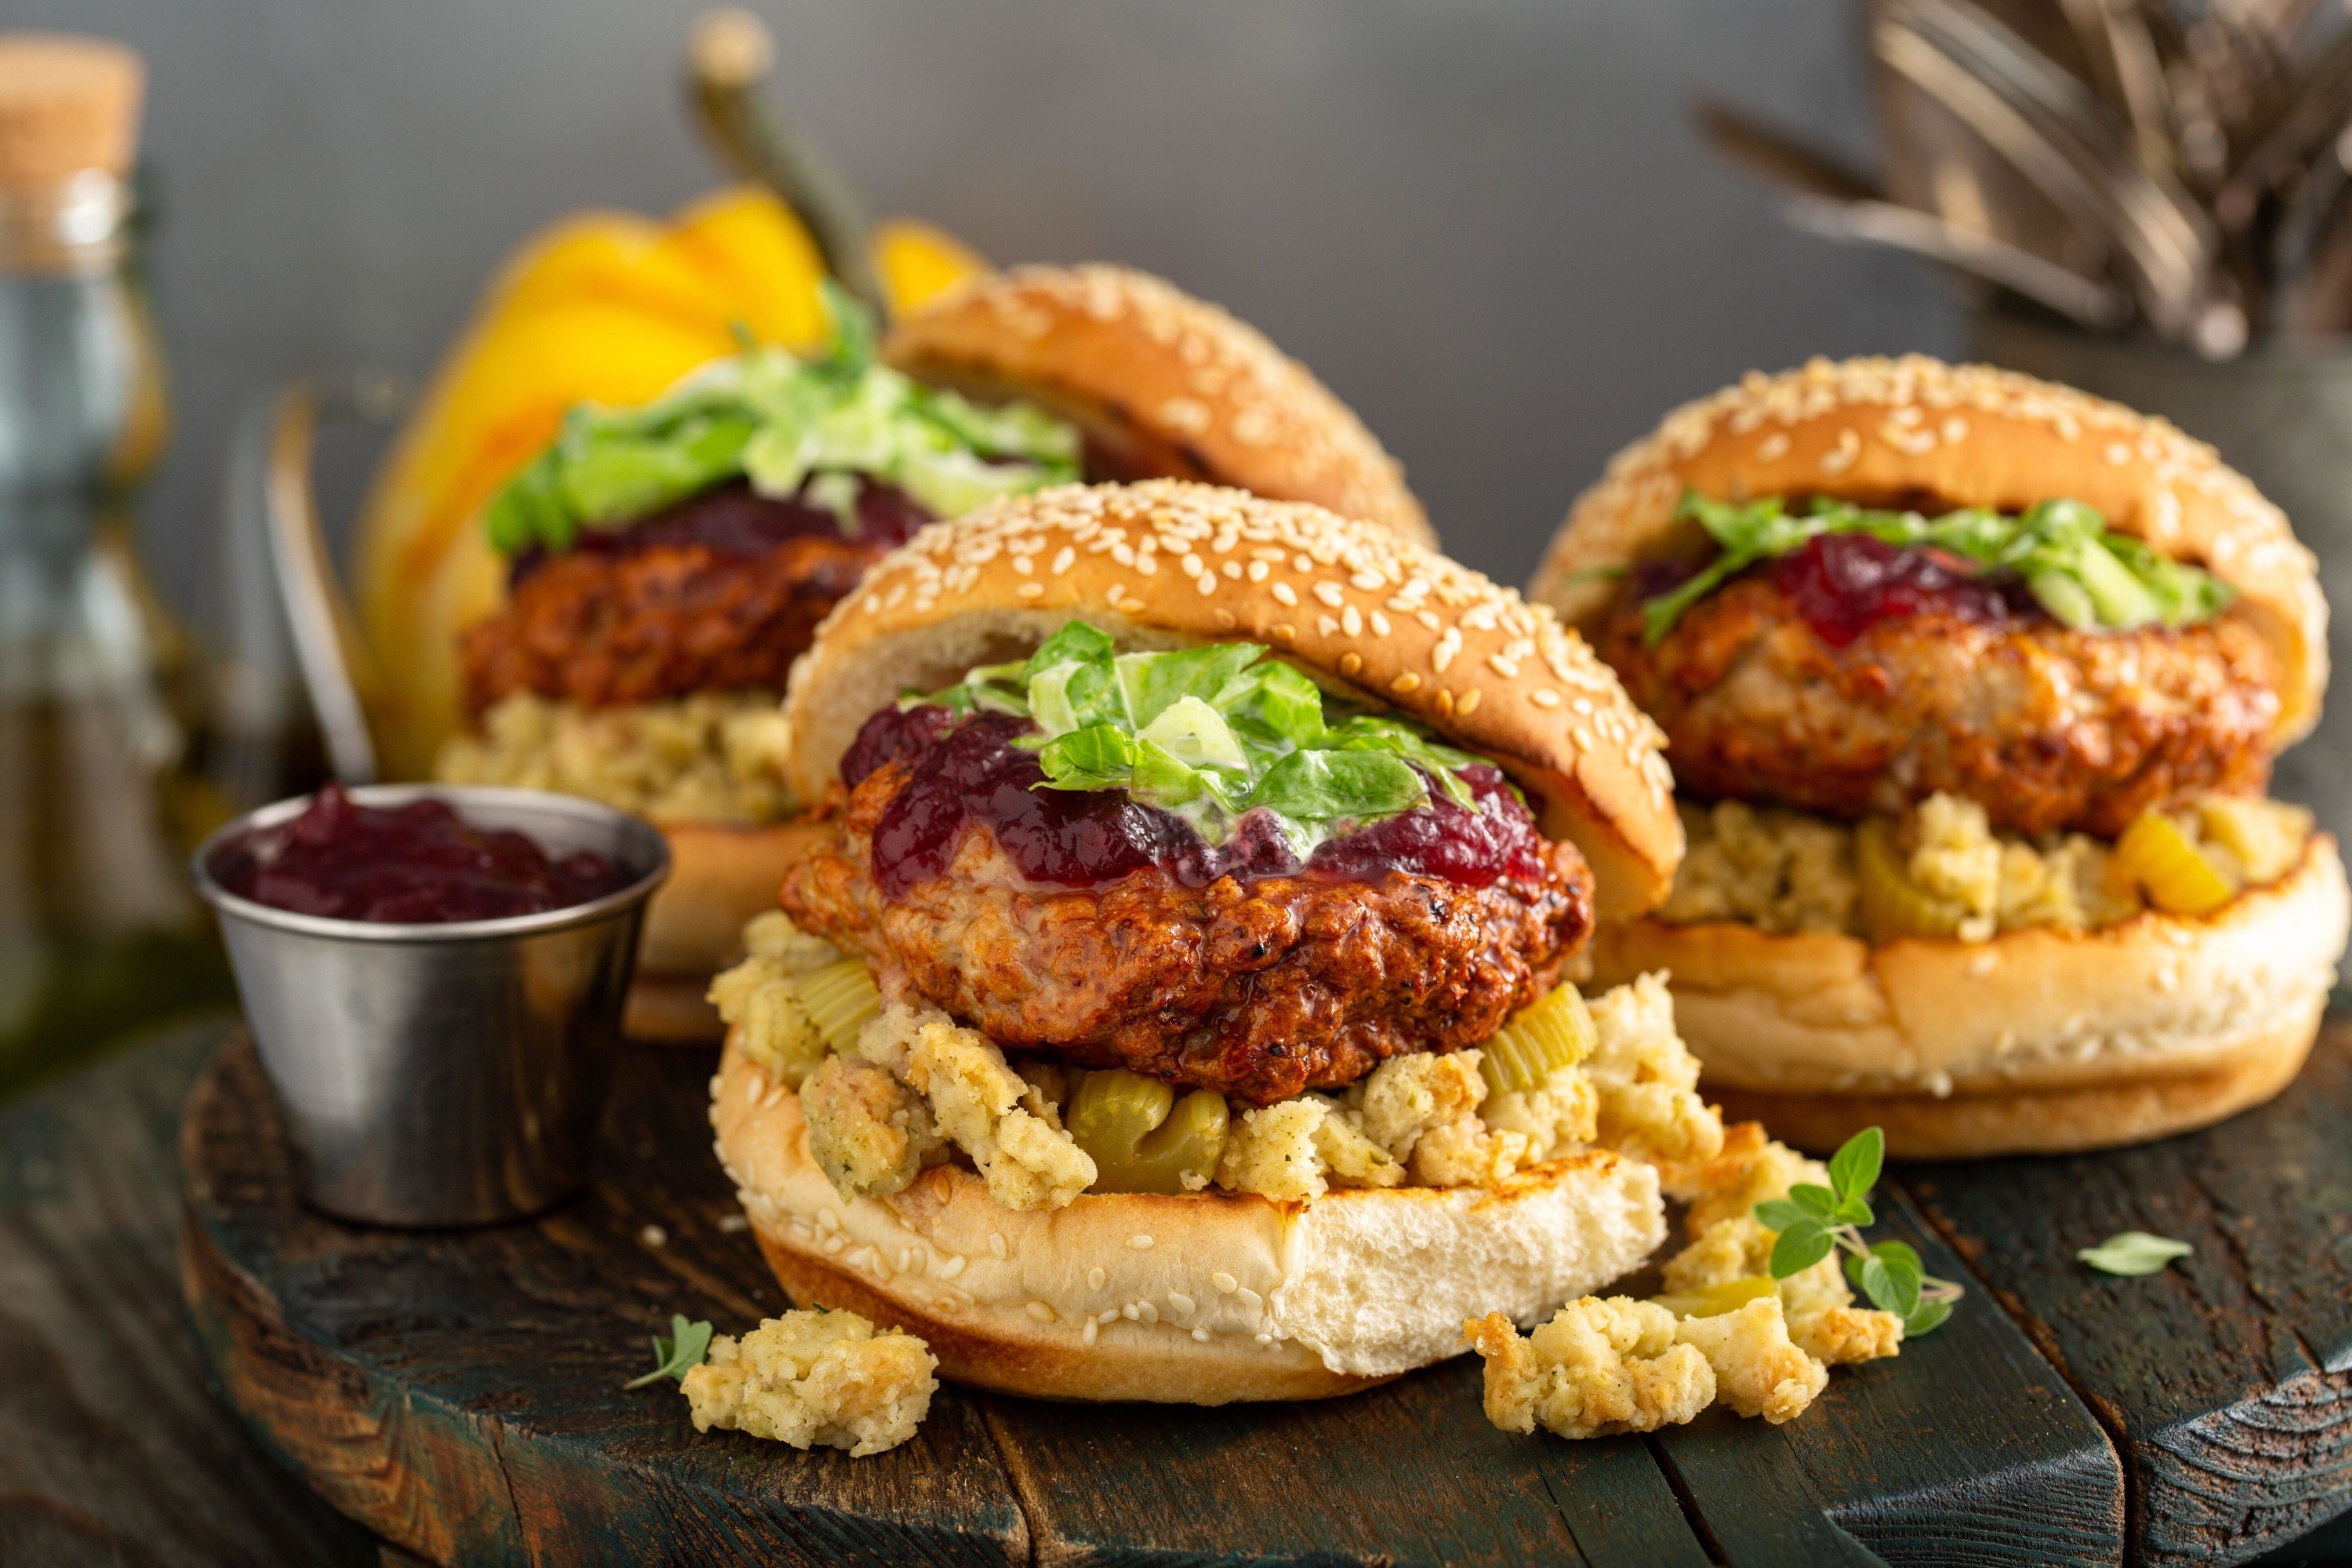 Turkey burgers with stuffing and cranberry sauce